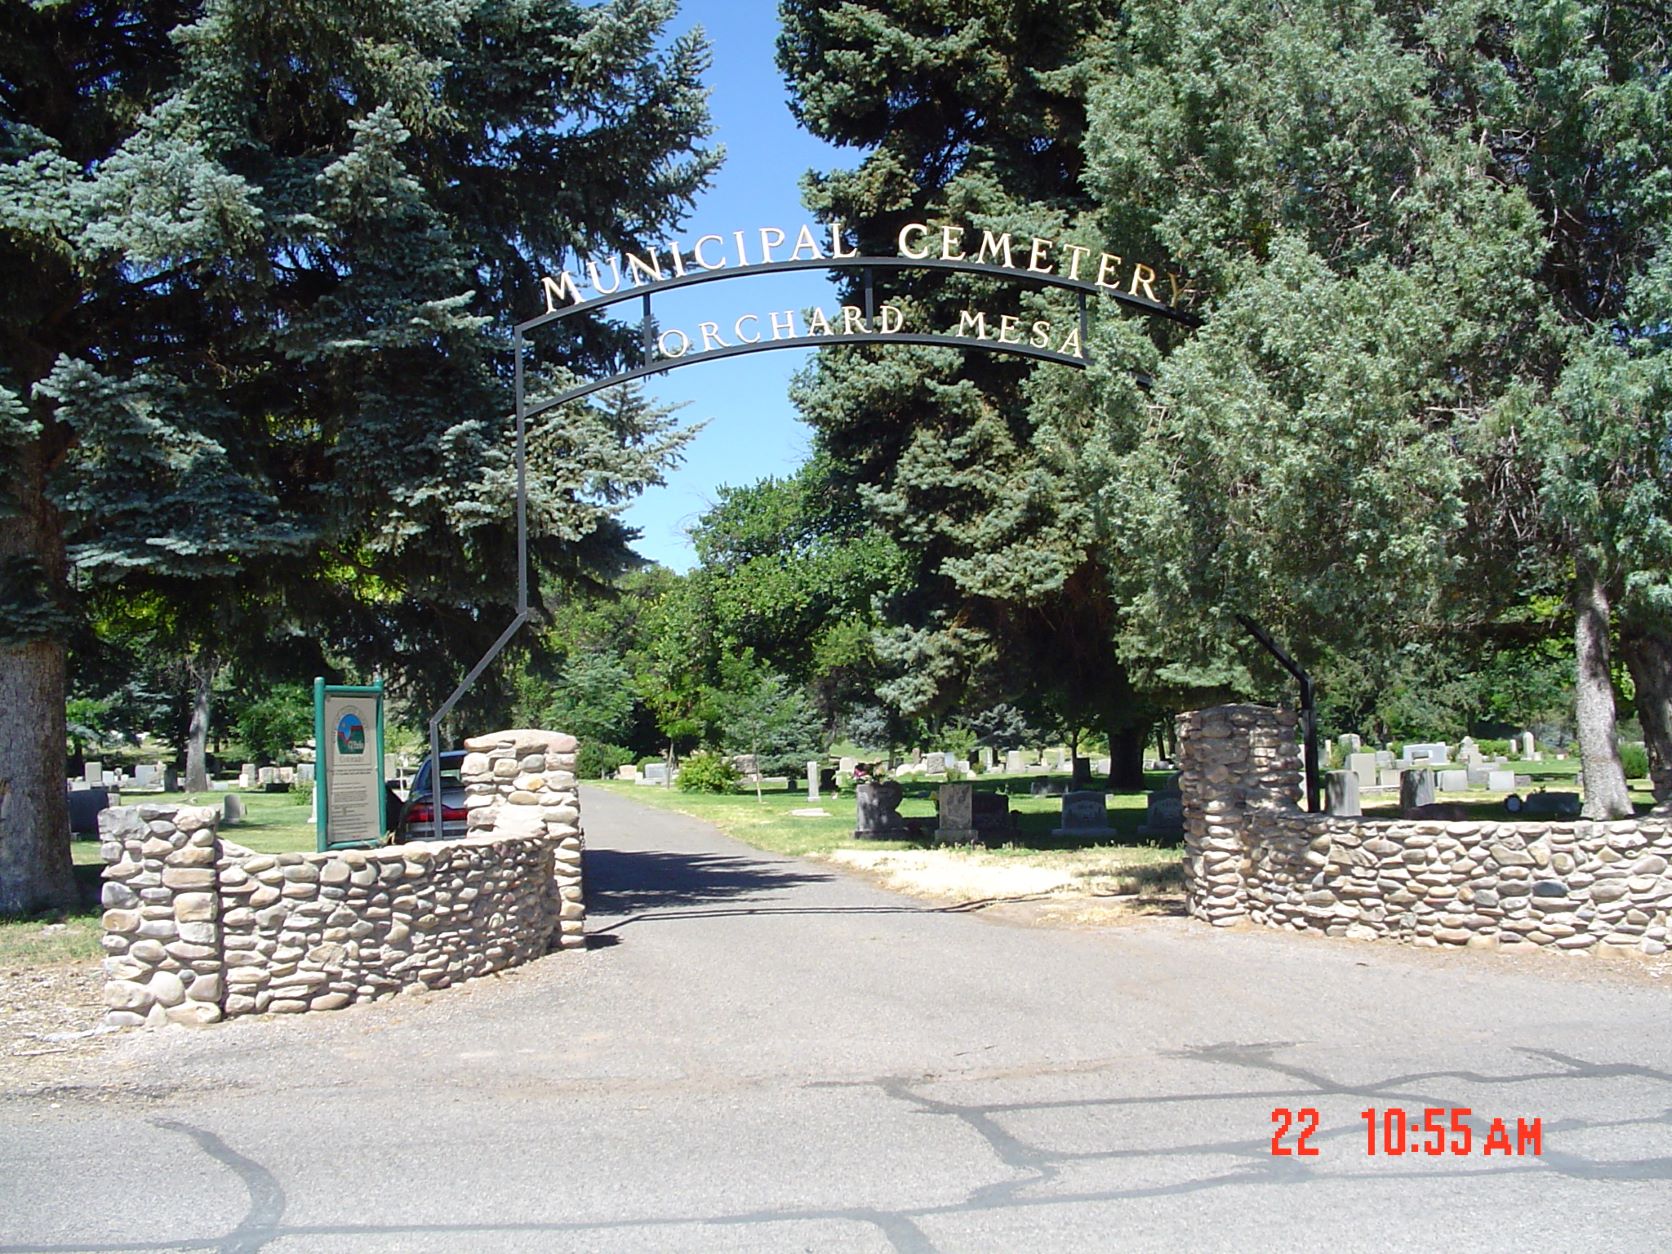 Orchard Mesa Cemetery